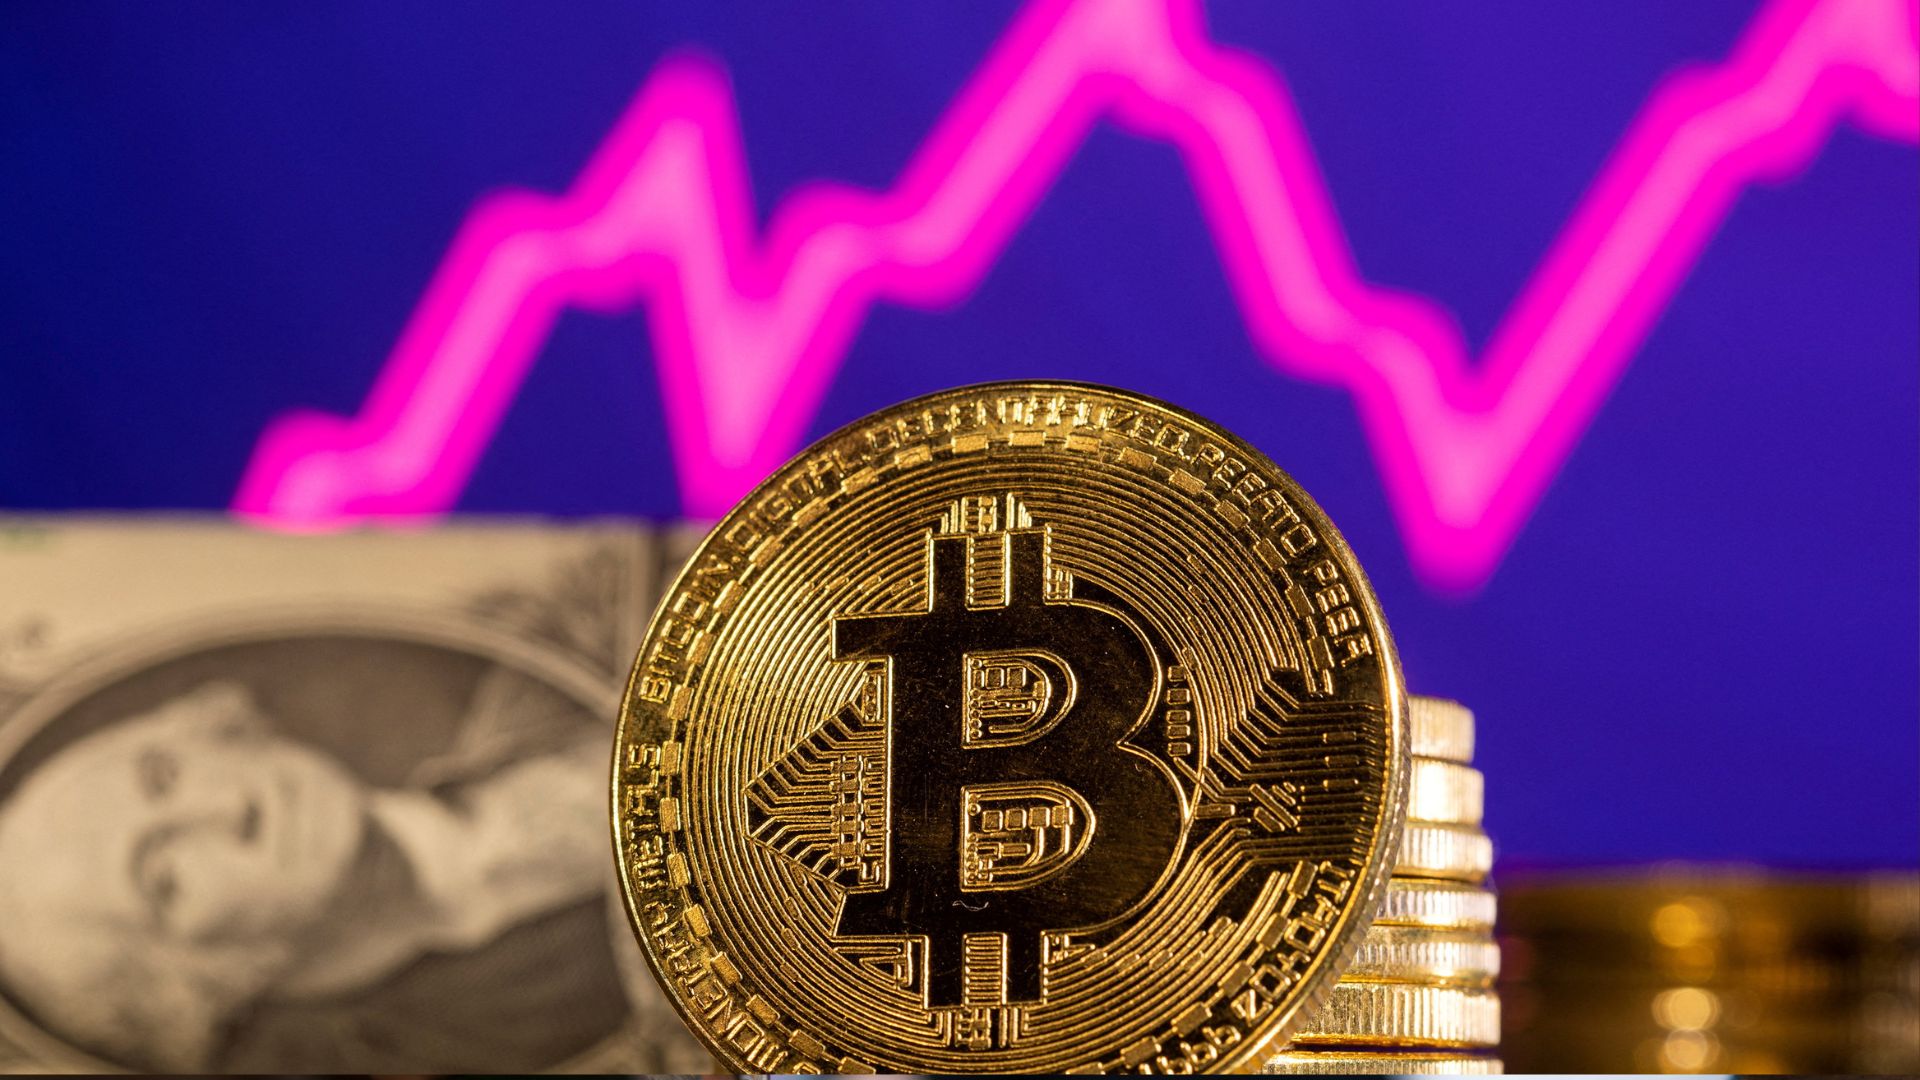 Bitcoin's value climbed above $70,000 in early March before dropping to around $65,000 this week. /Dado Ruvic/Reuters Illustration